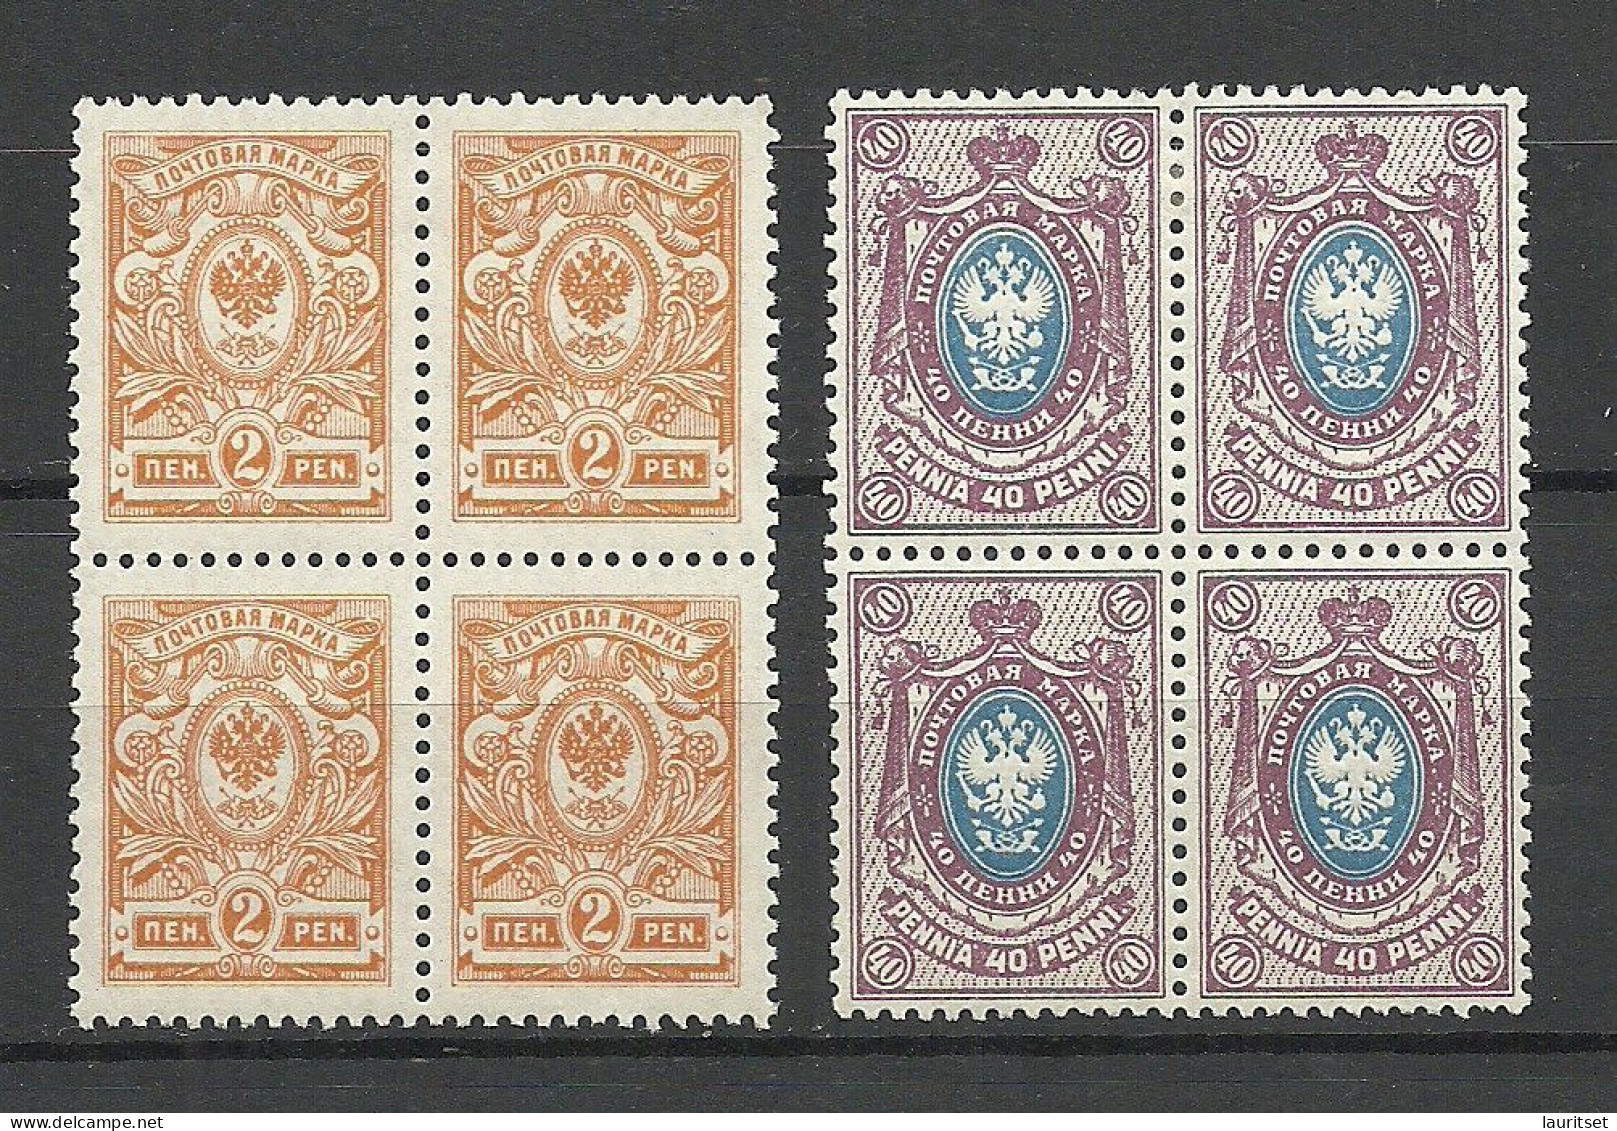 FINLAND FINNLAND 1911 Michel 61 & 65 As 4-blocks MNH/MH (2 Upper Stamps Are MNH/**, Lower Row Is MH/*) - Nuovi